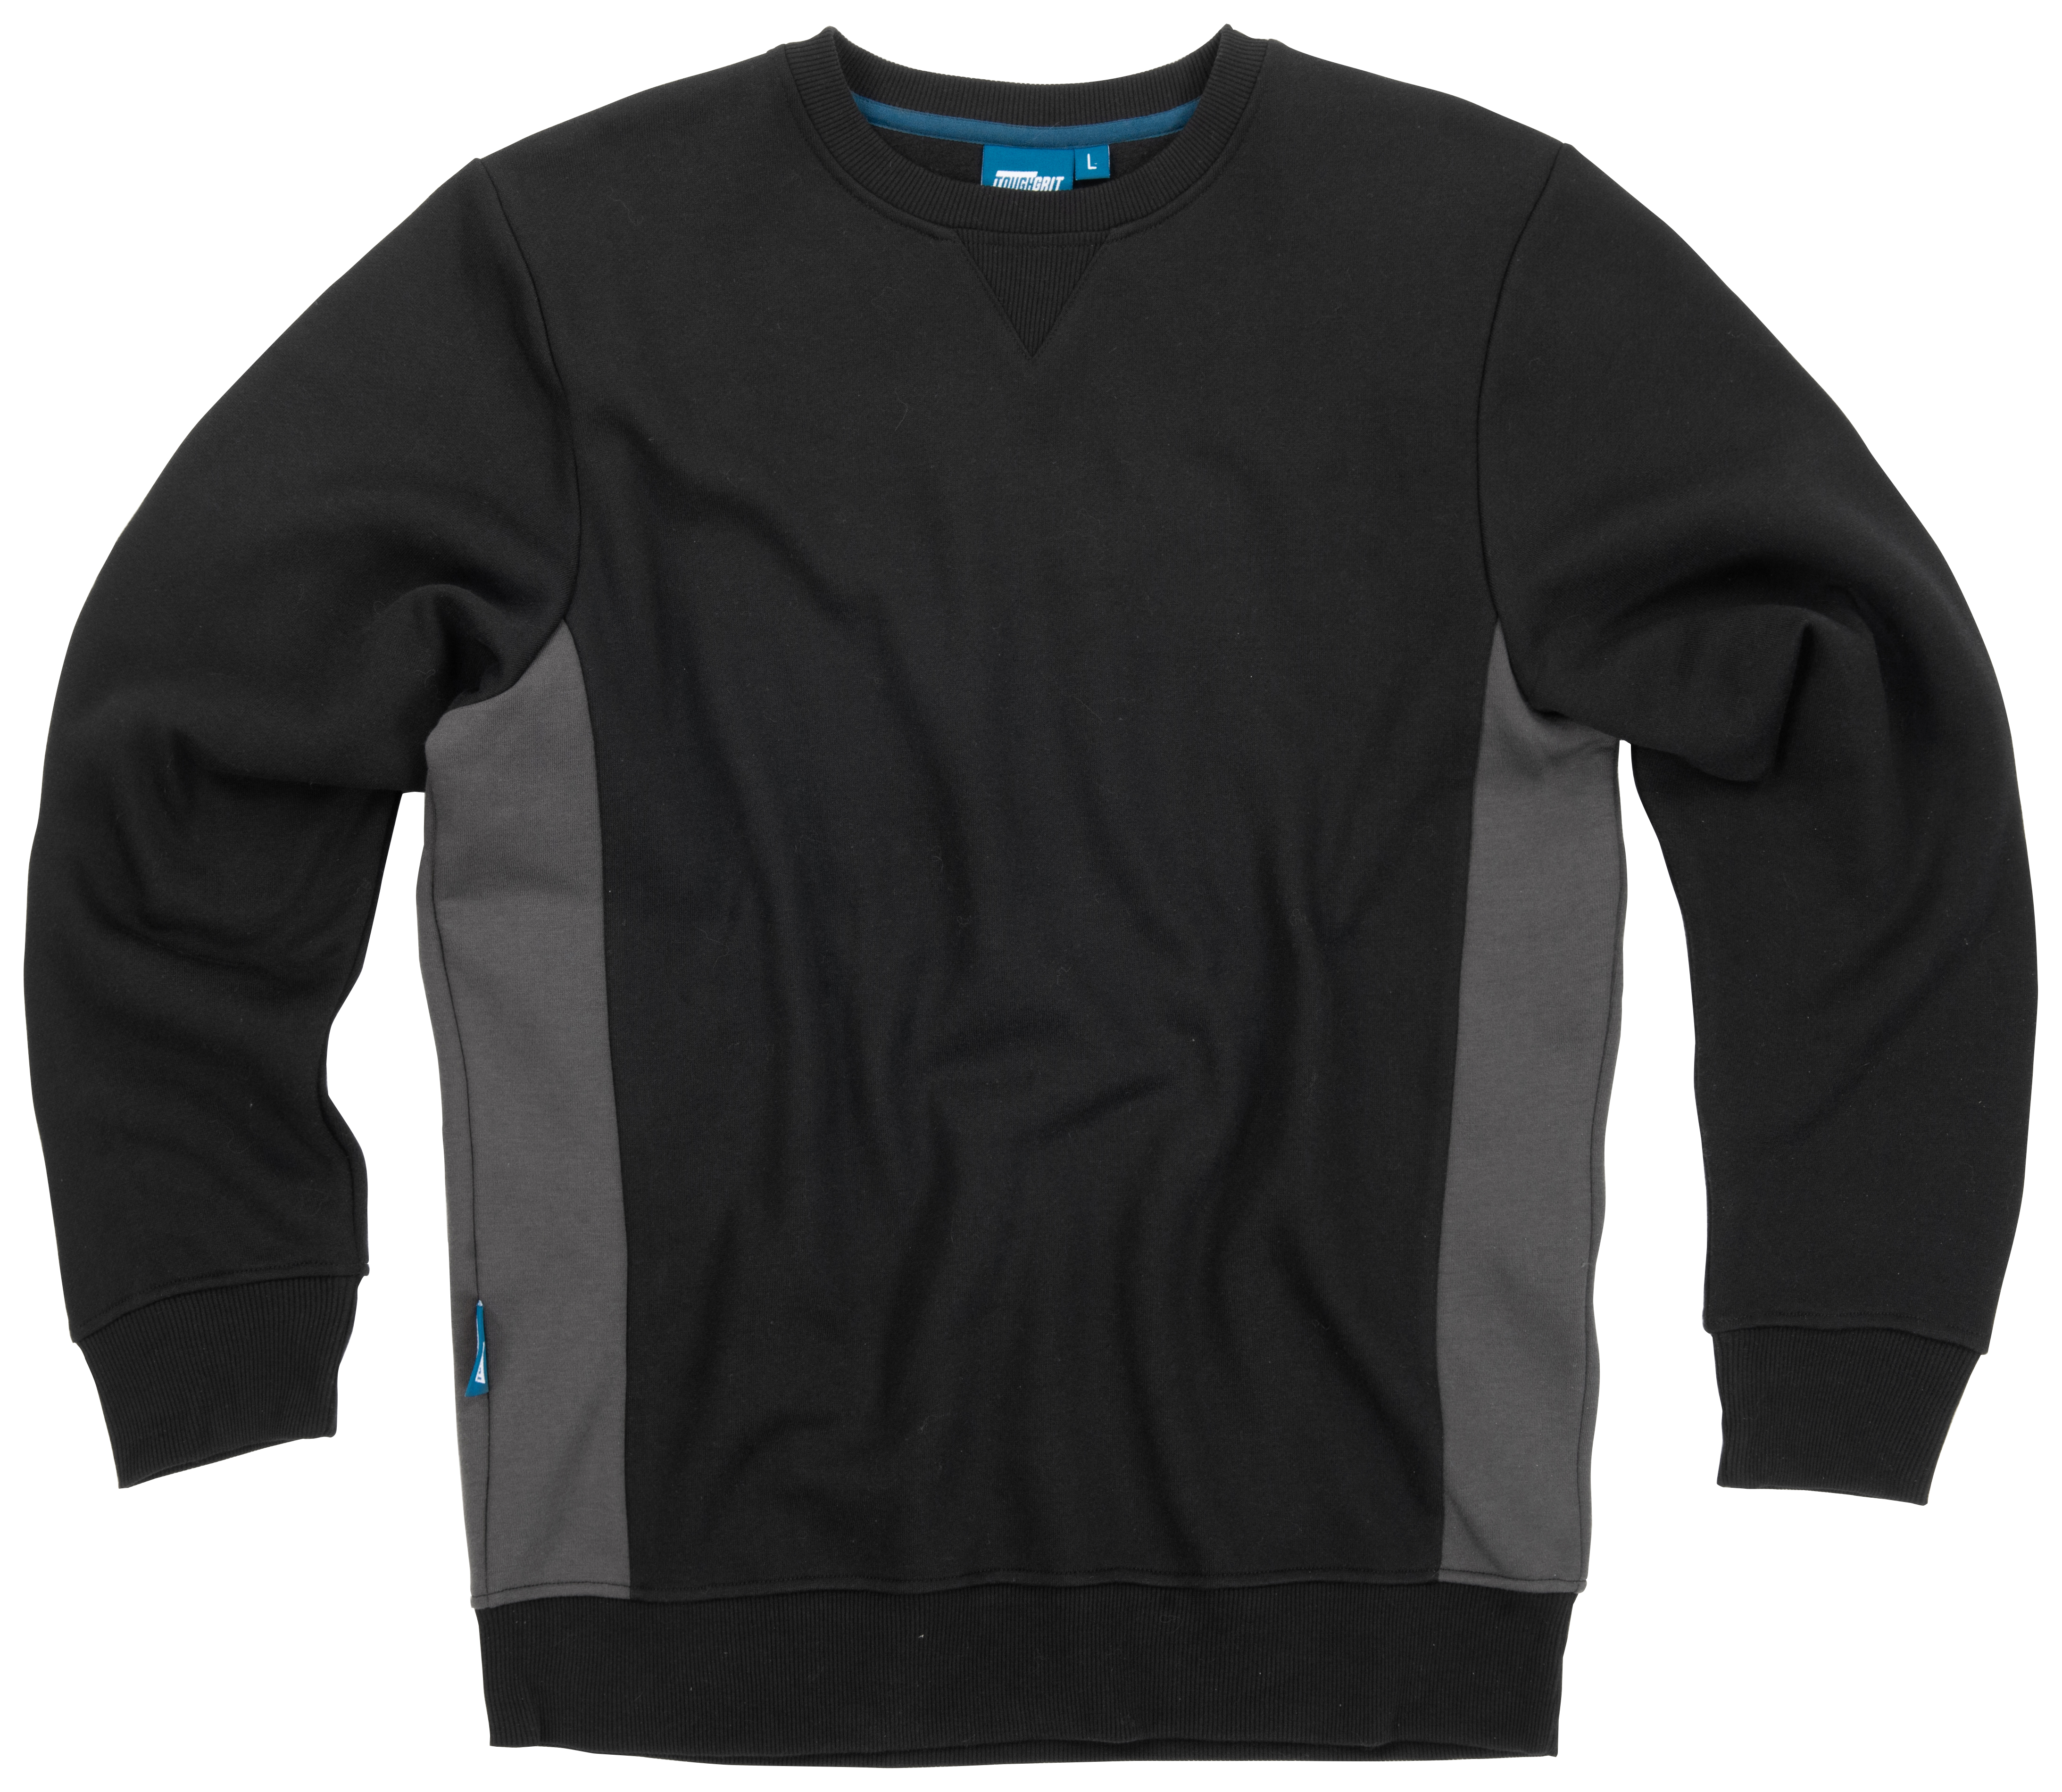 Image of Tough Grit Sweatshirt, in Black and Grey, Size: XL